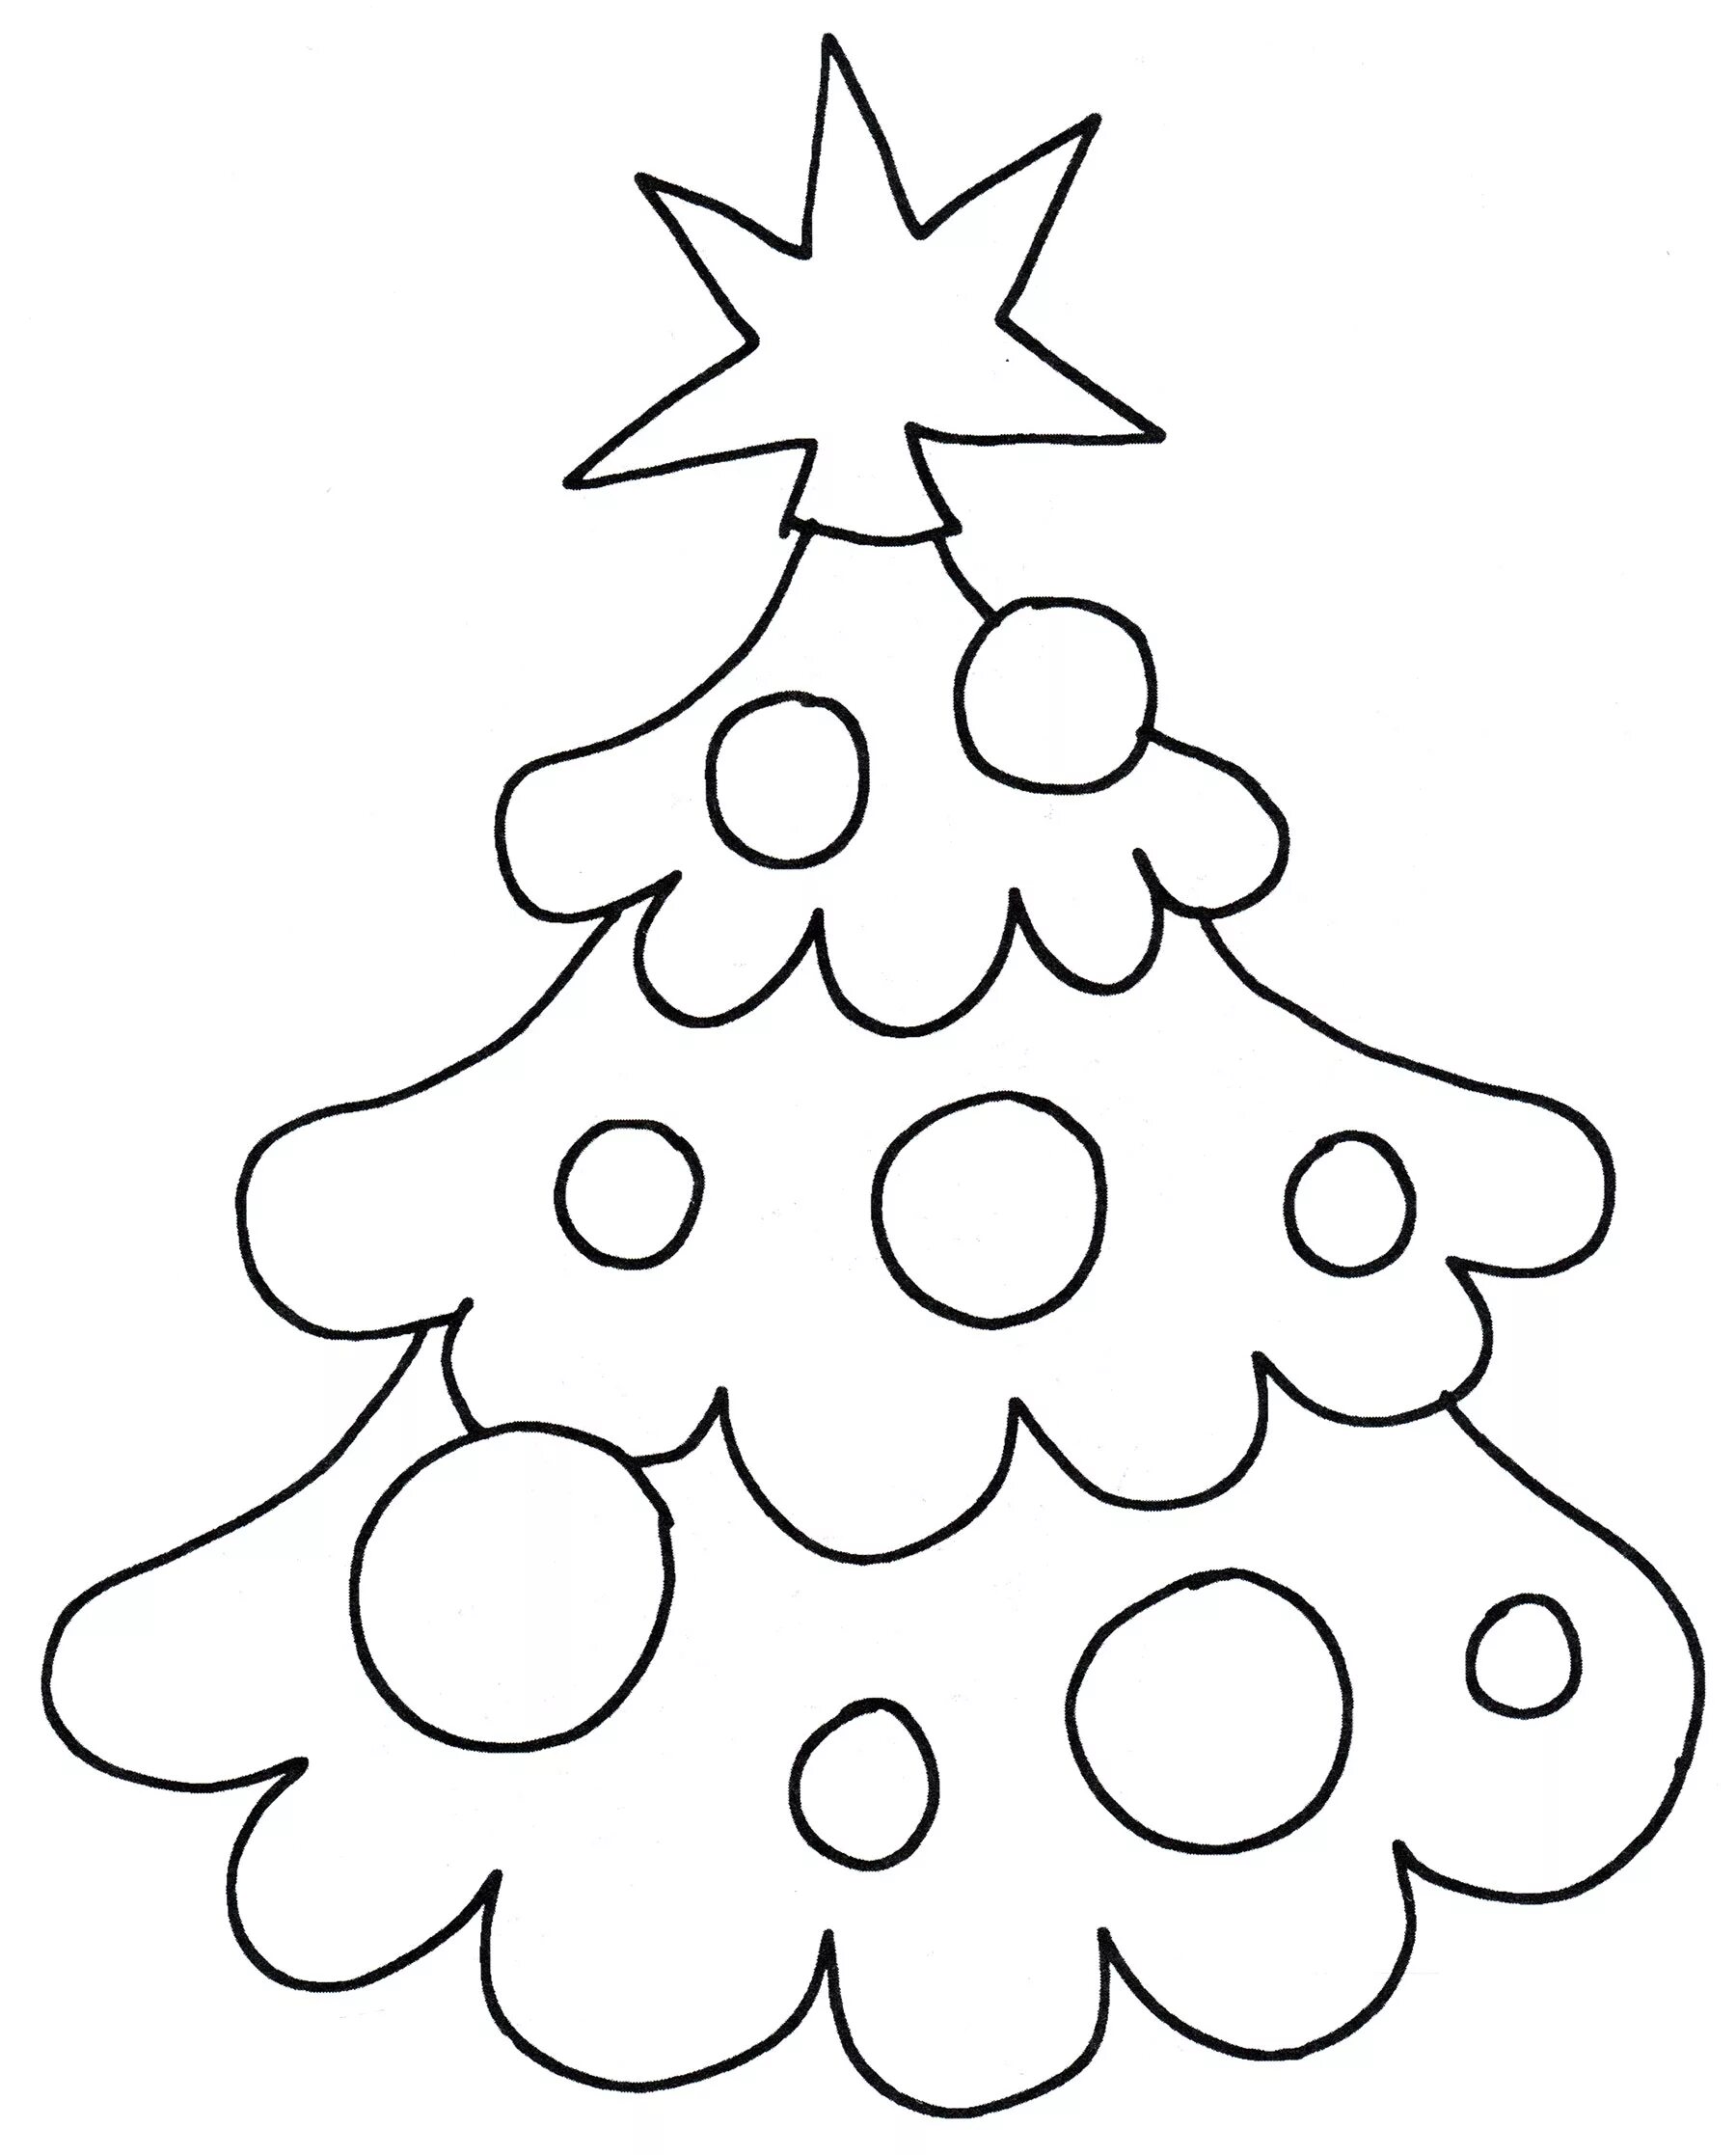 Christmas tree coloring book for toddlers